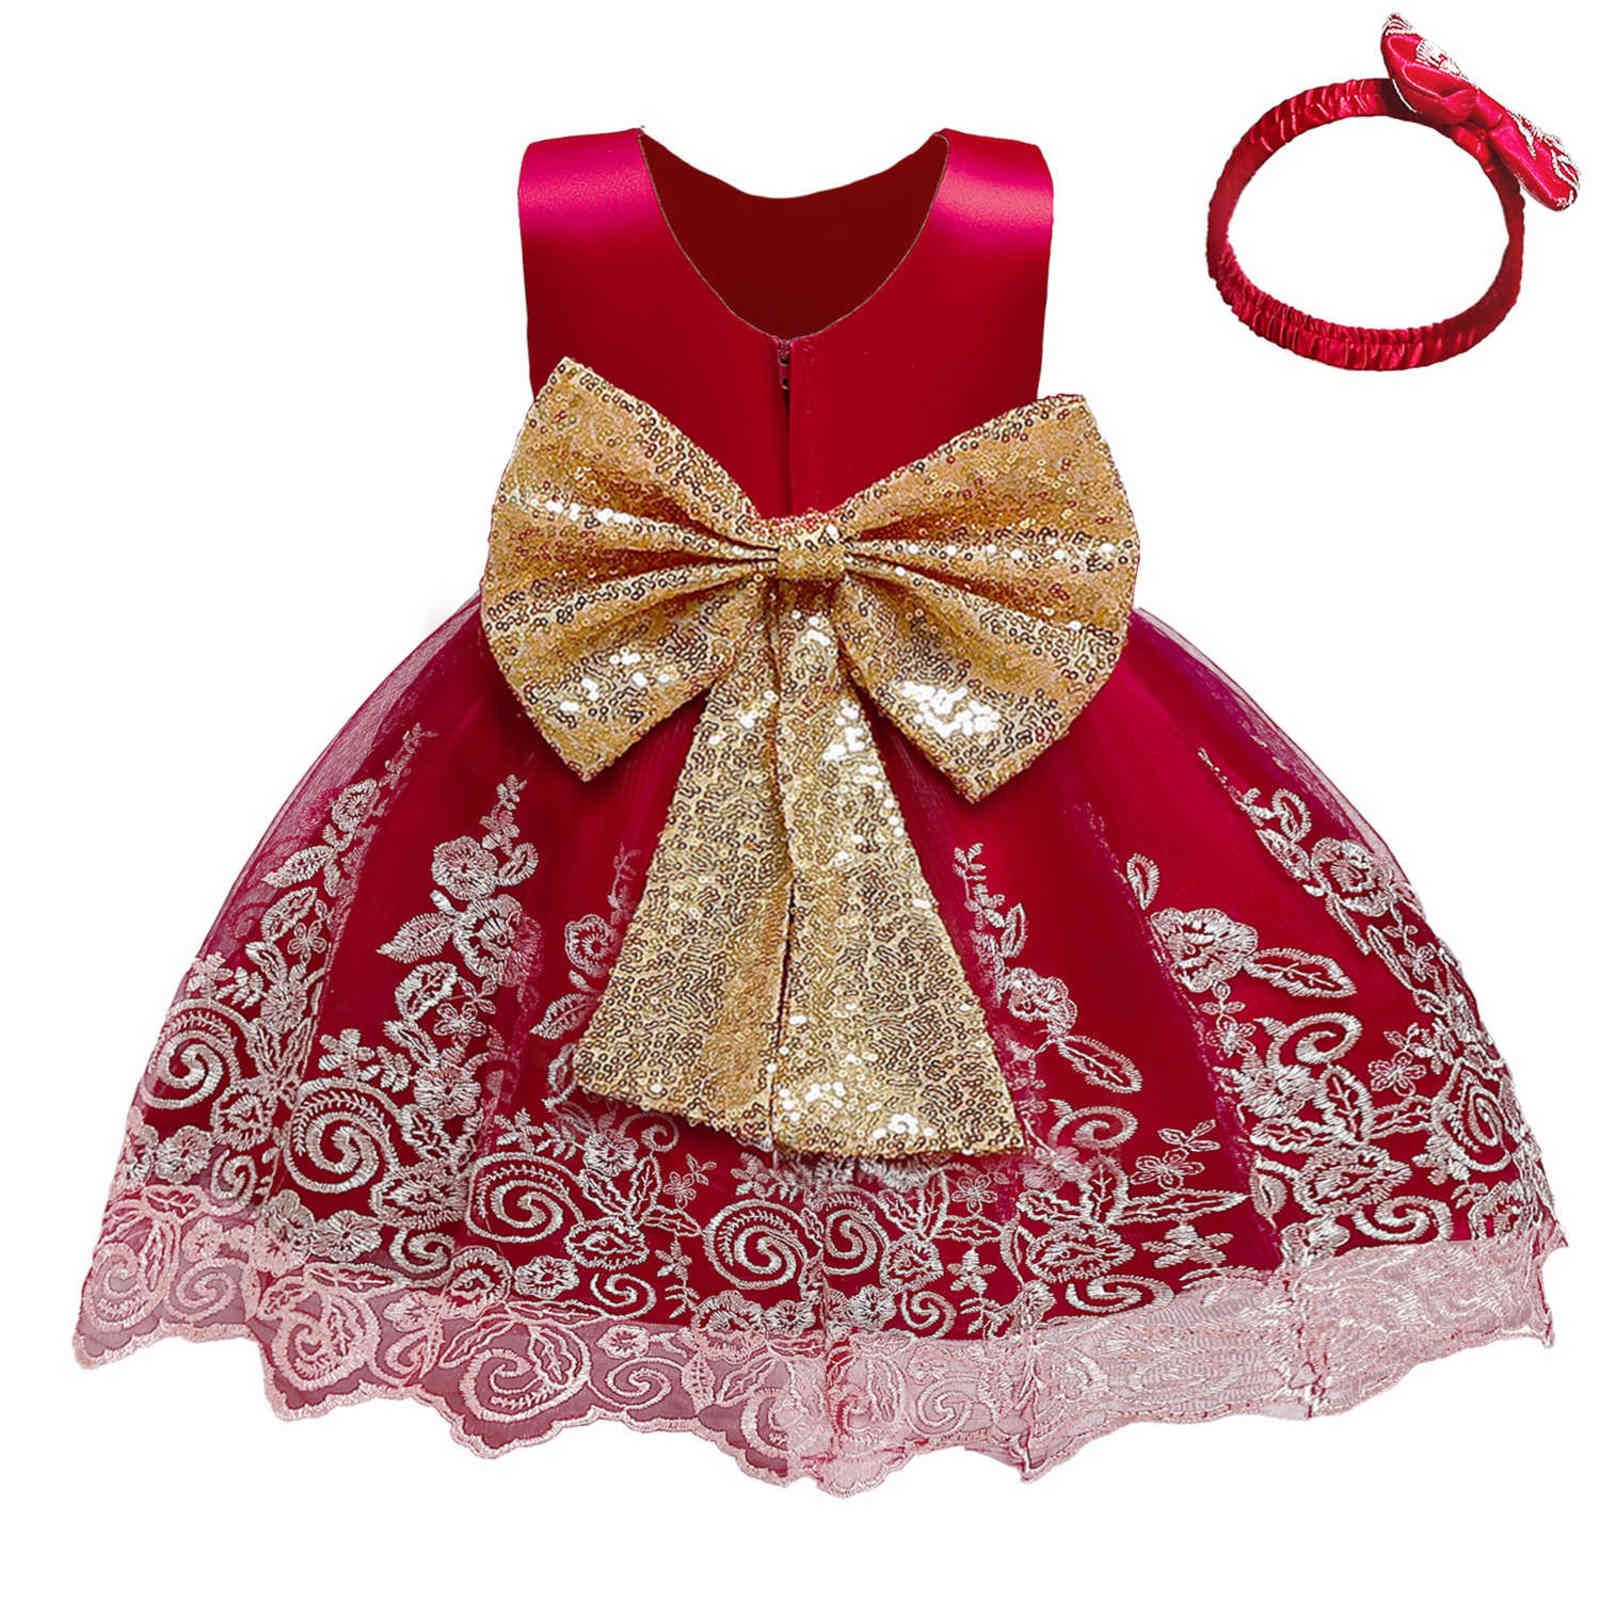 01 Gold Bow Red